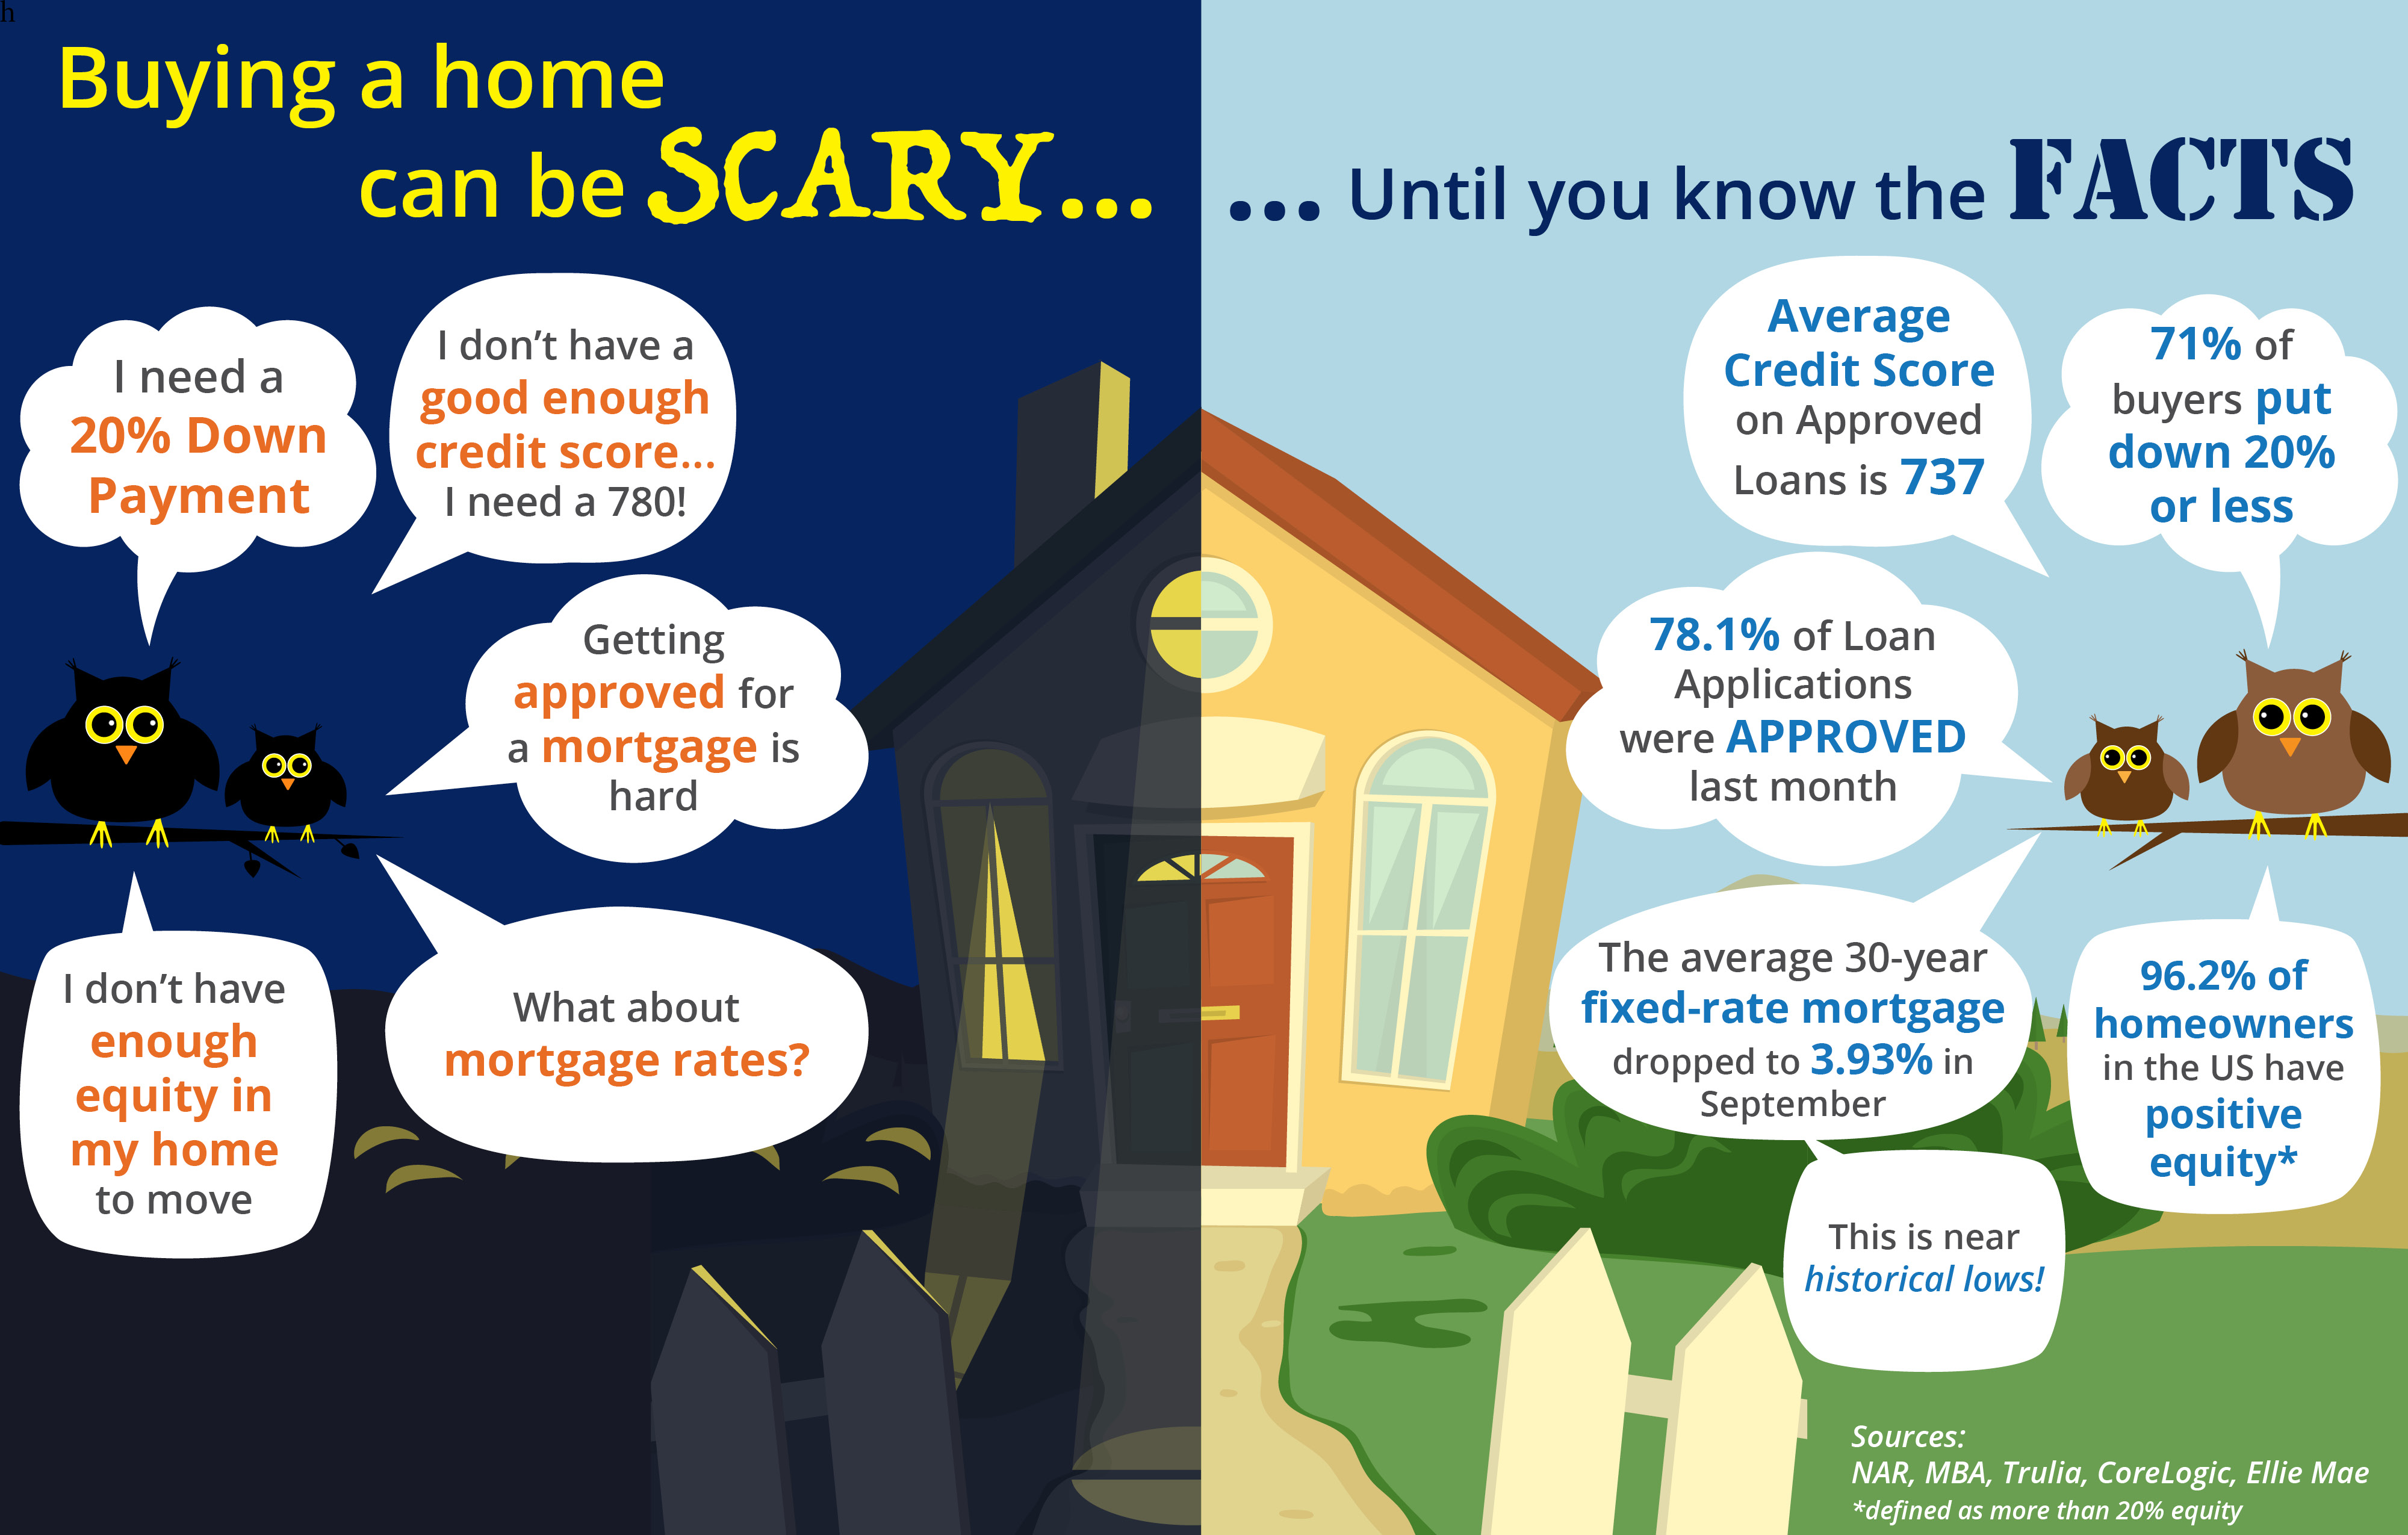 Buying a home can be SCARY…Until you know the FACTS [INFOGRAPHIC] | MyKCM